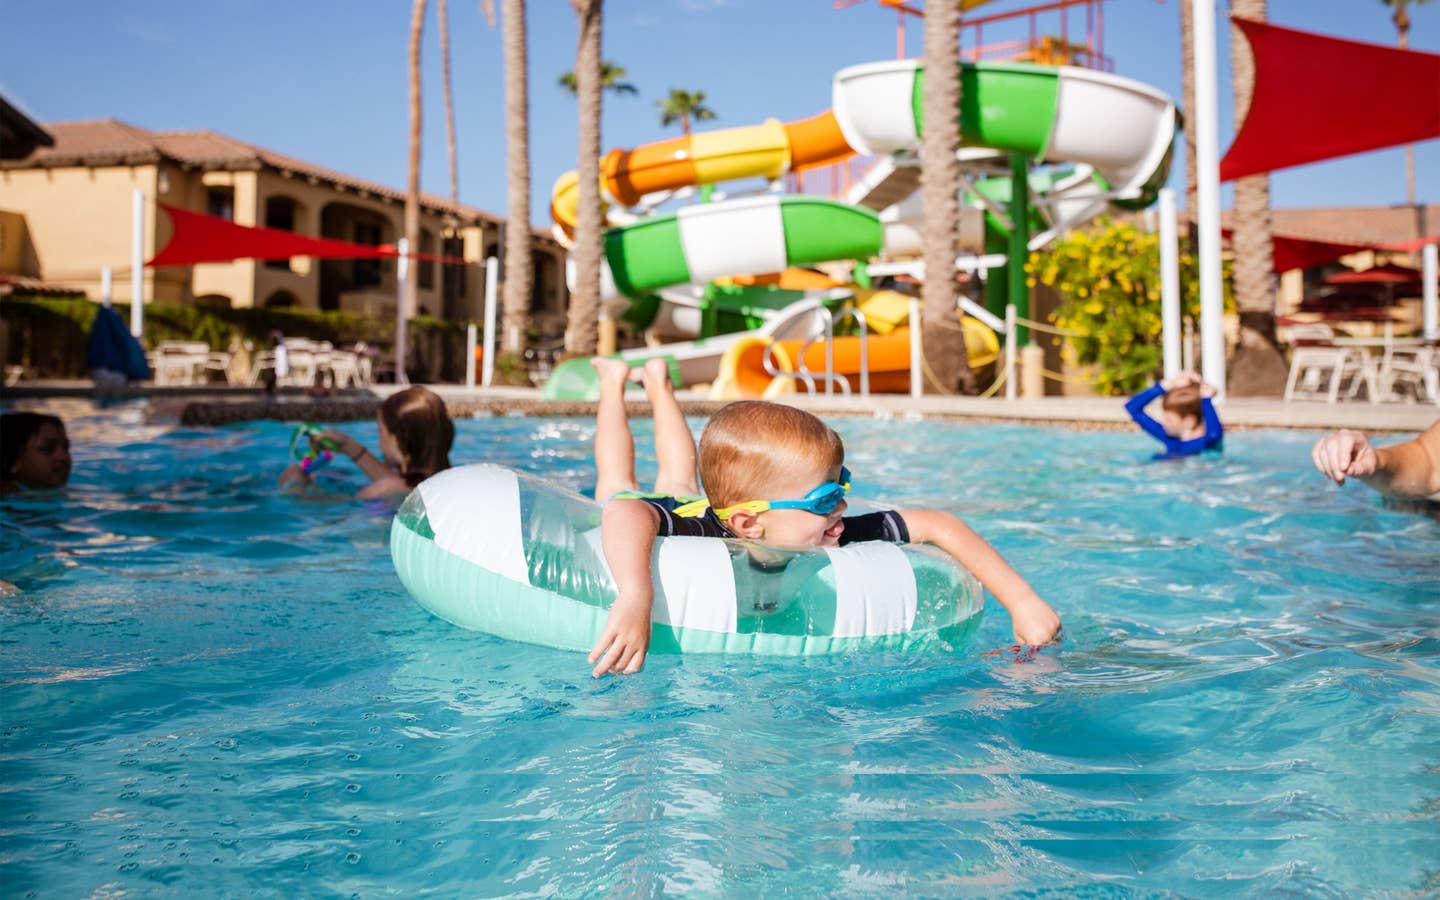 Young child floating in pool at Scottsdale Resort.